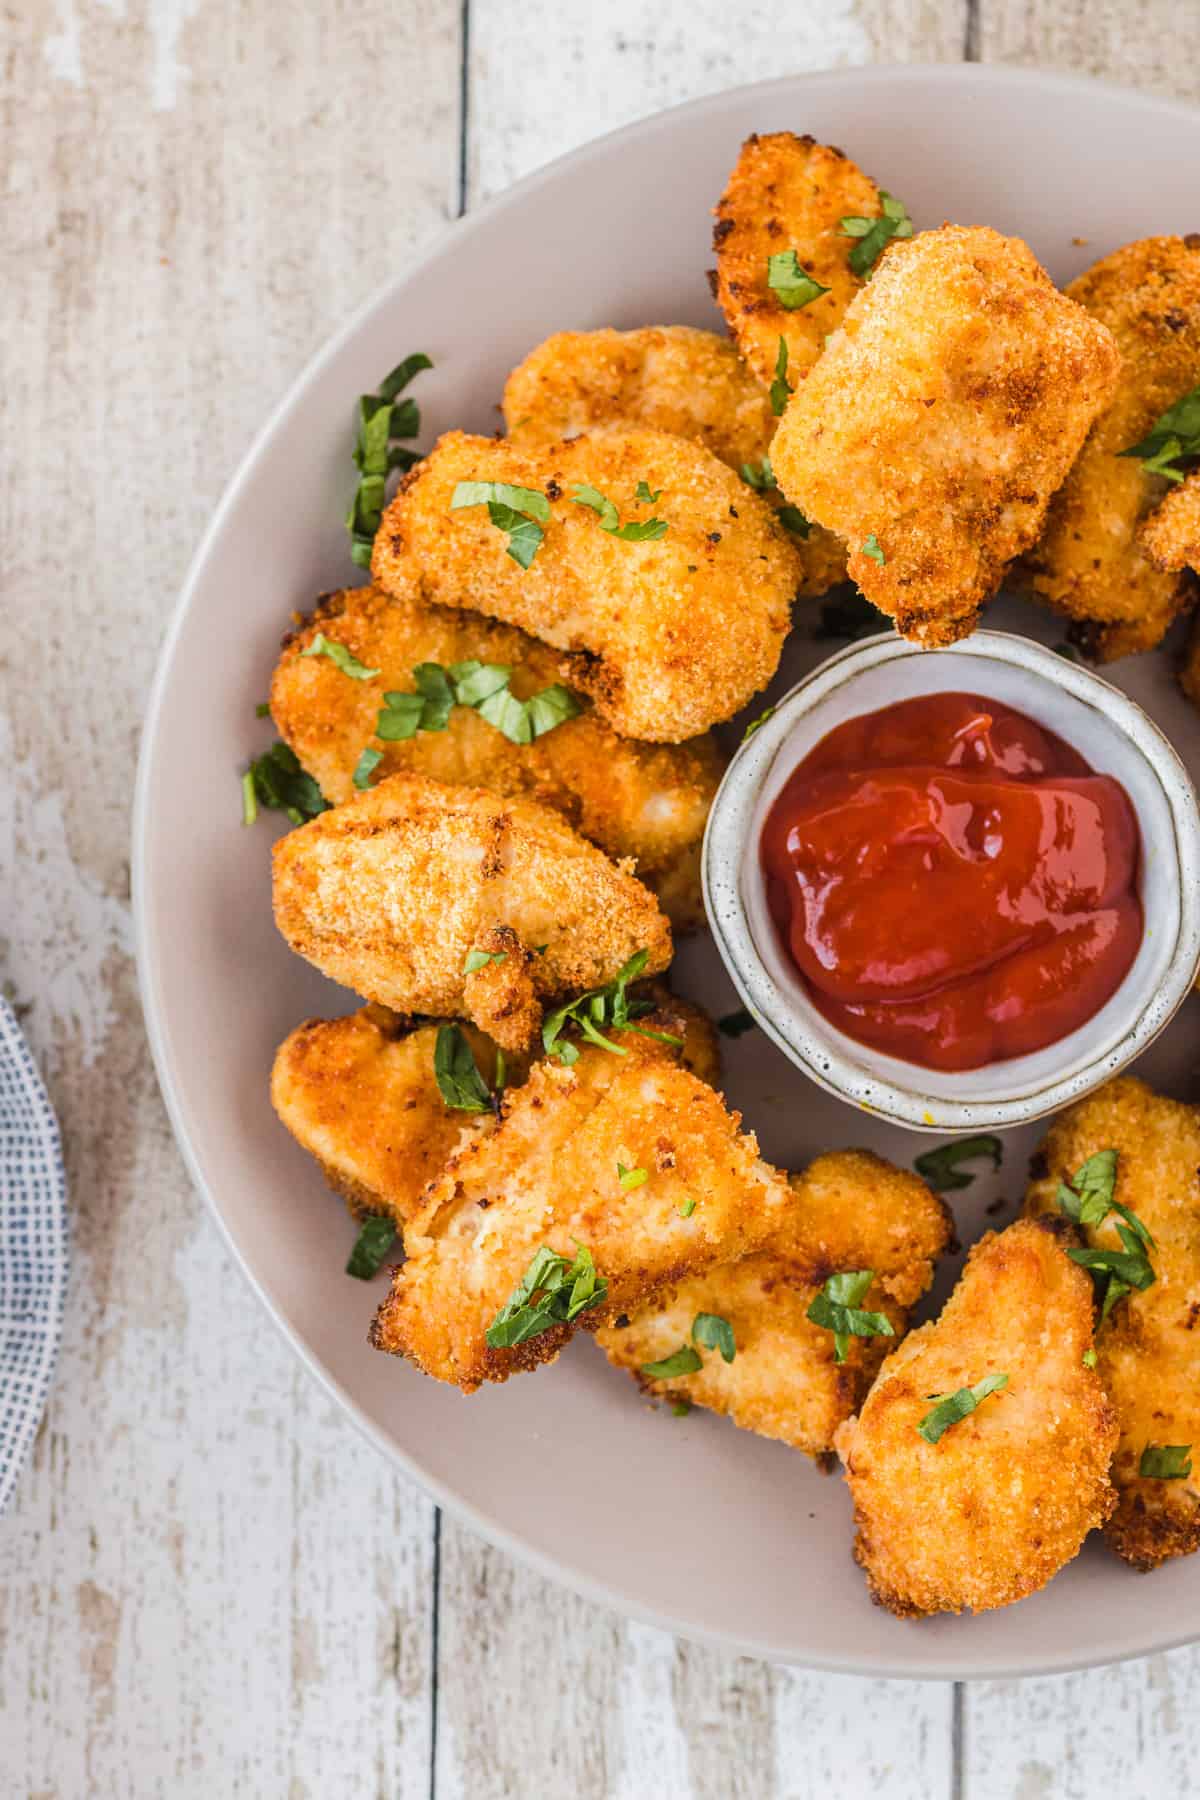 chicken nuggets on a plate with ketchup